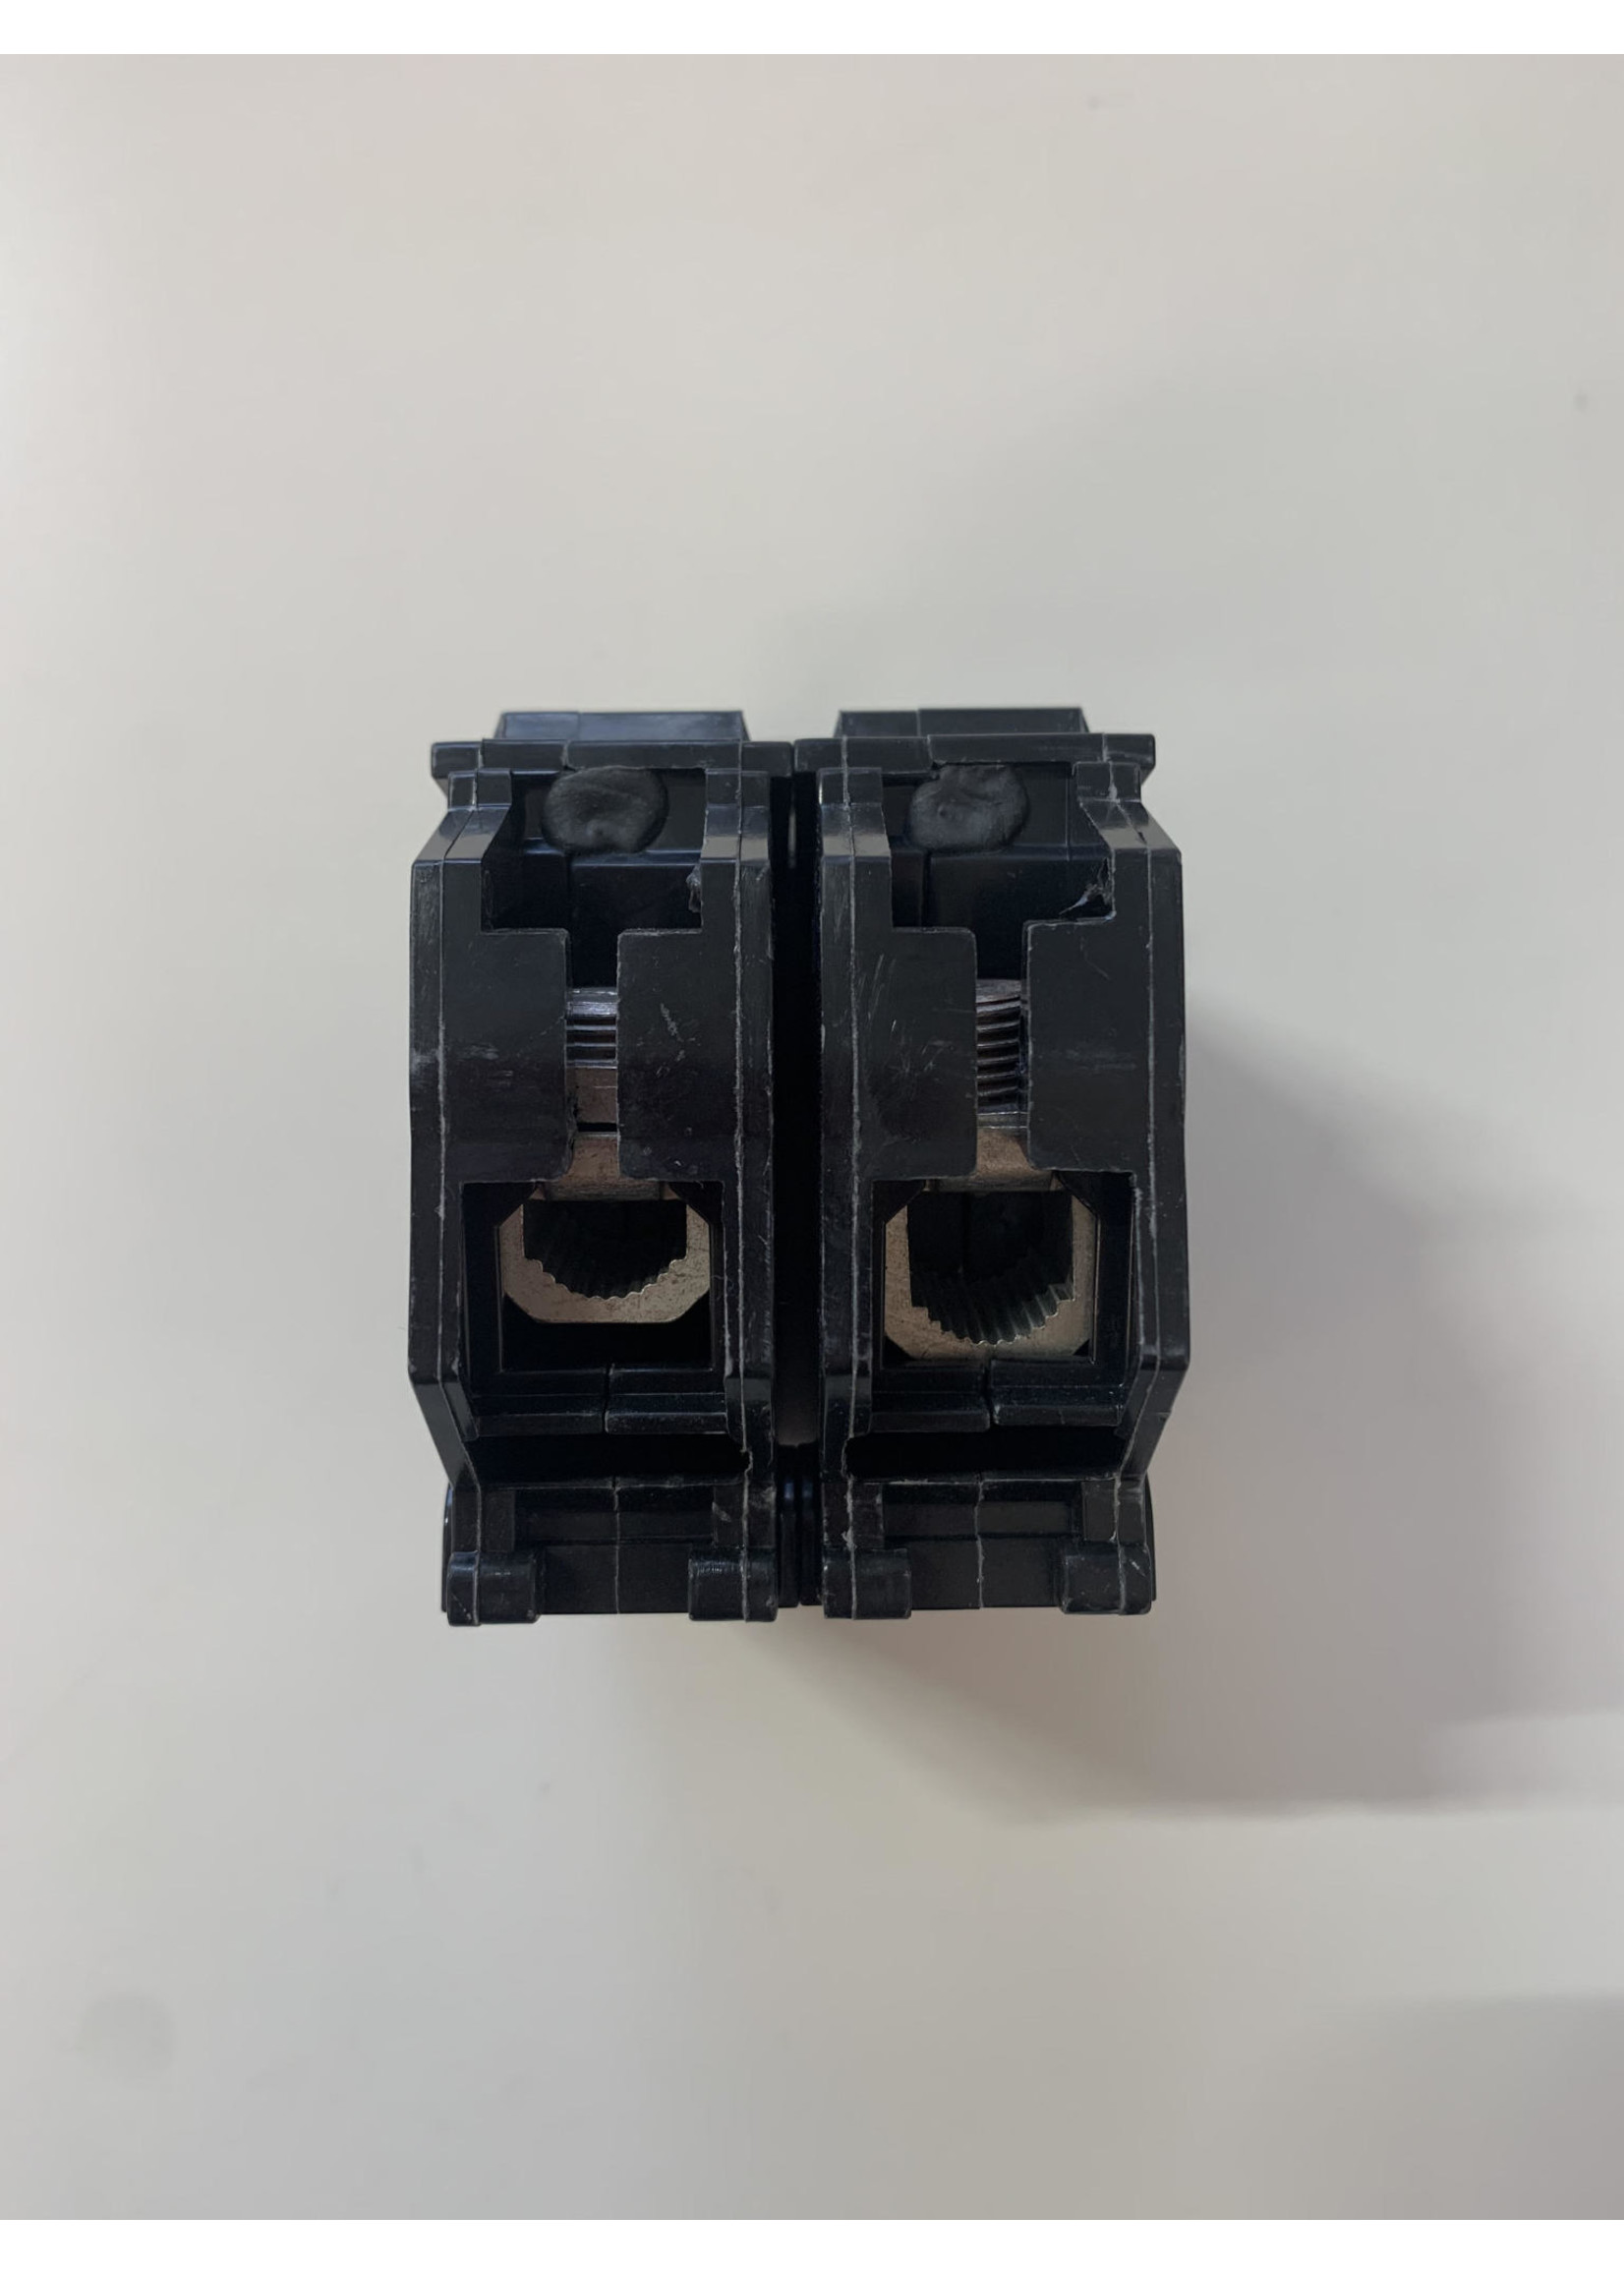 GE BREAKER 2-100 AMPS THICK (THQL-21100)